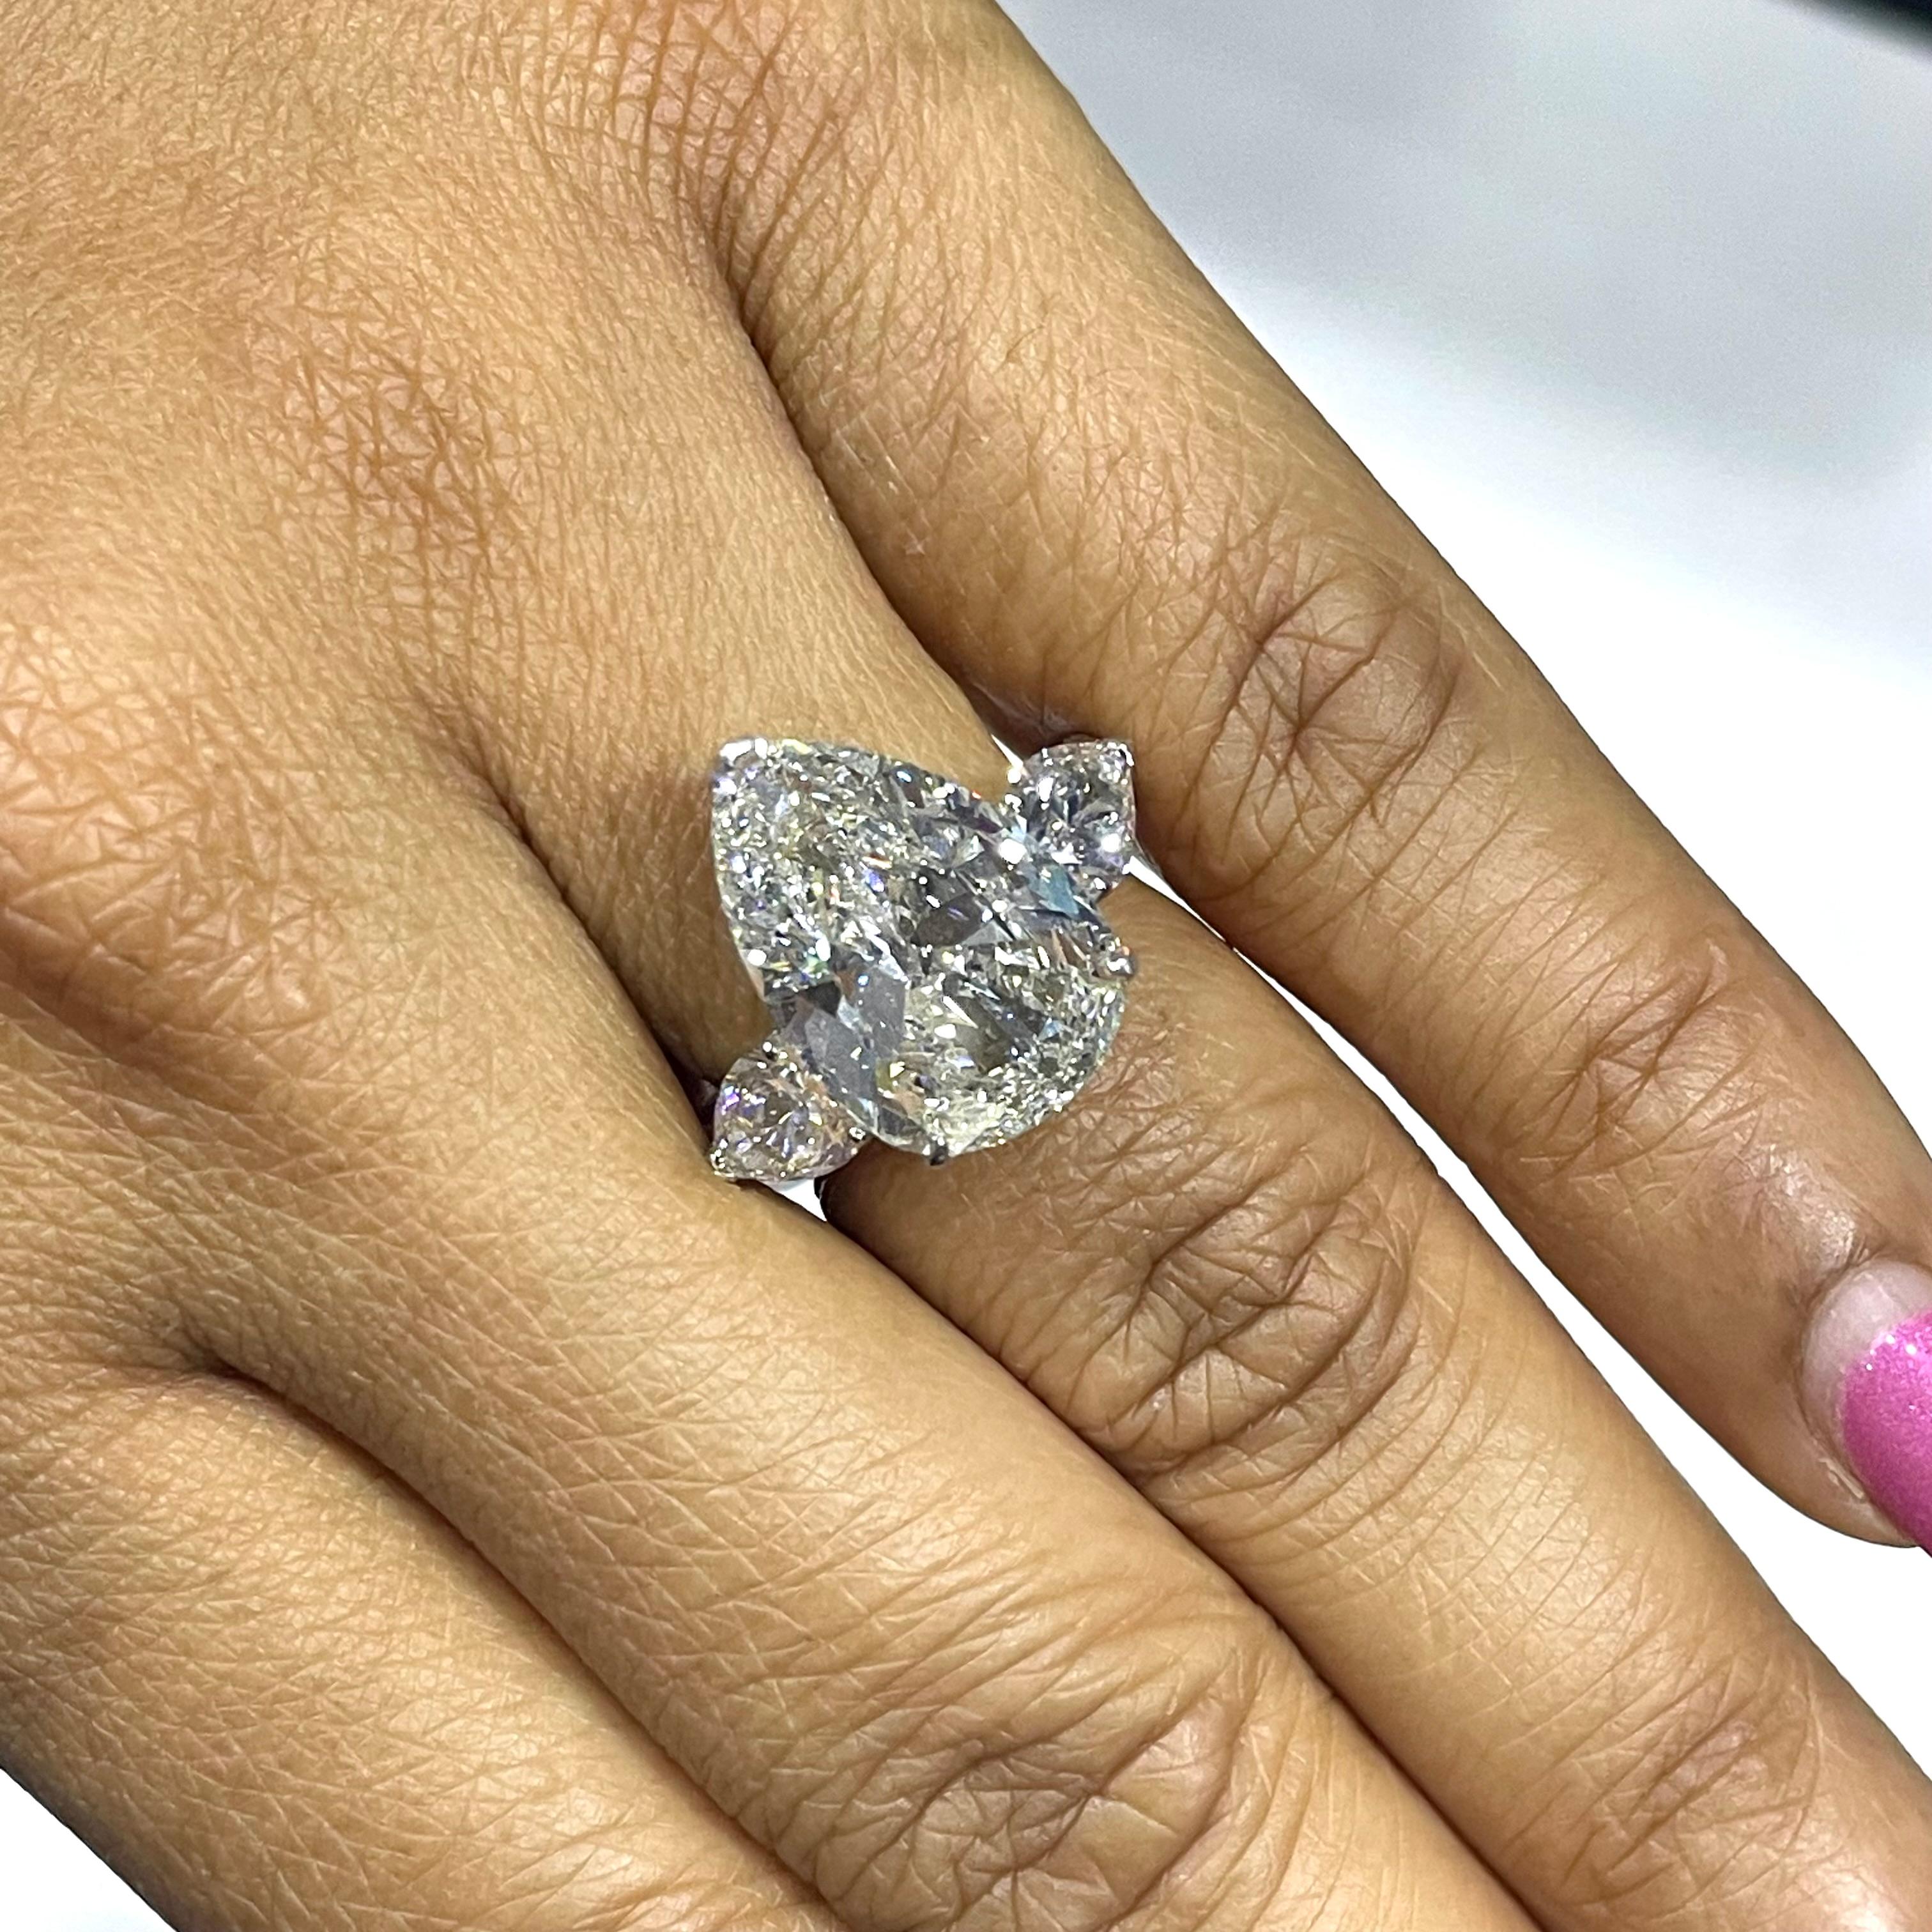 A timeless and enigmatic 3 stone ring, the Diva Ring showcases a stunning larger than average 6.64 ct pear shaped diamond flanked by 2 additional pears to the side. With a depth of 53.4 and measurements of 16.59 x 11.07, the center solitaire looks